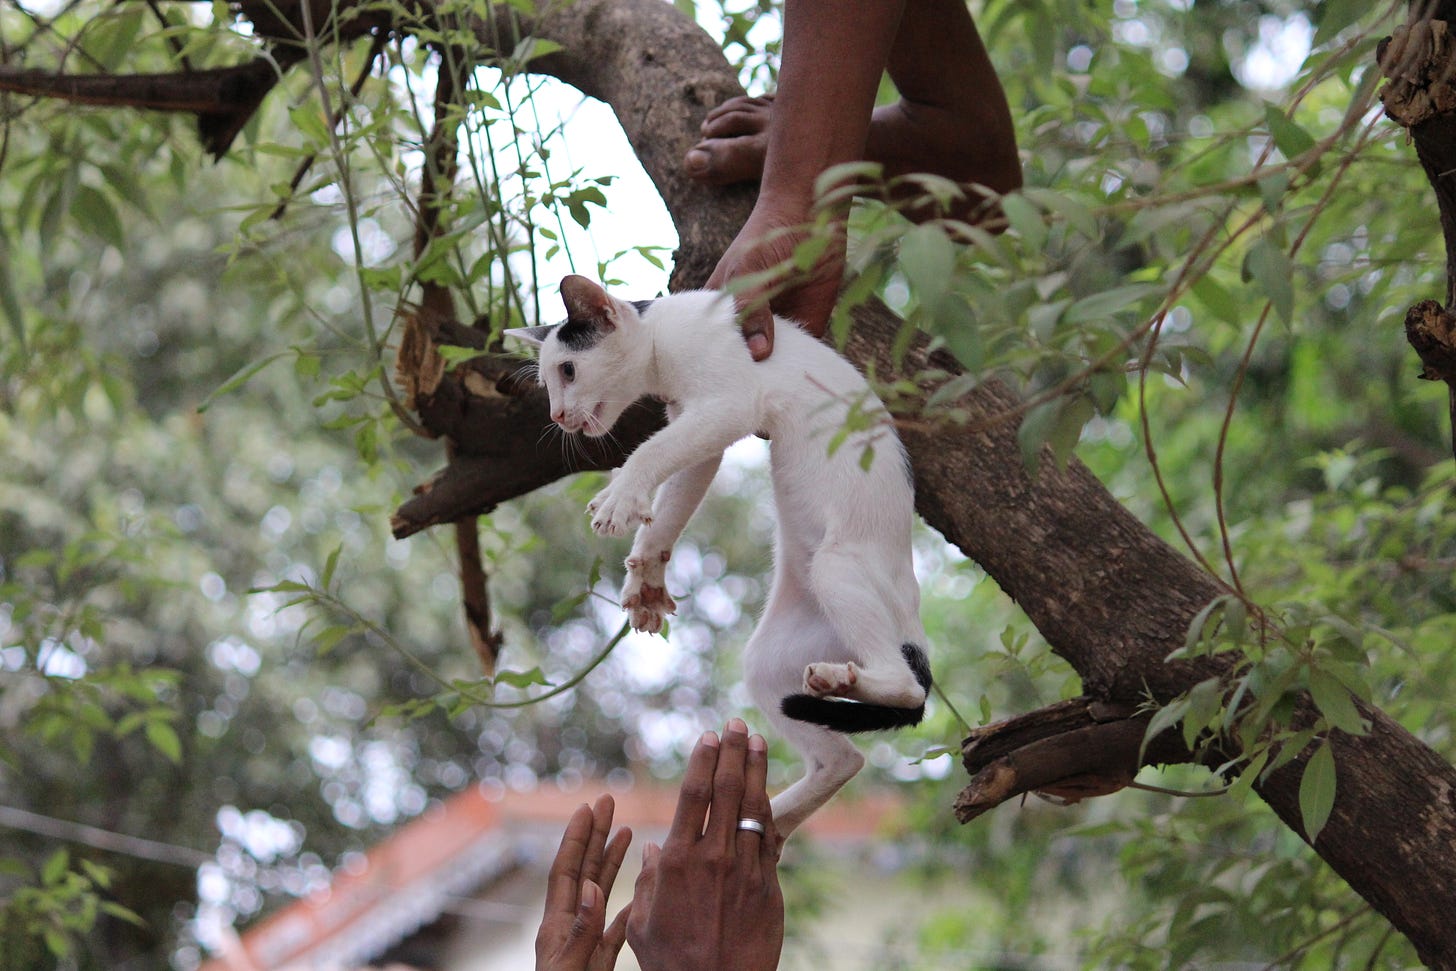 A person in a tree , only one hand and  foot visible, handing a white and gray cat with a black tail to a person with outstretched hands waiting on the ground below